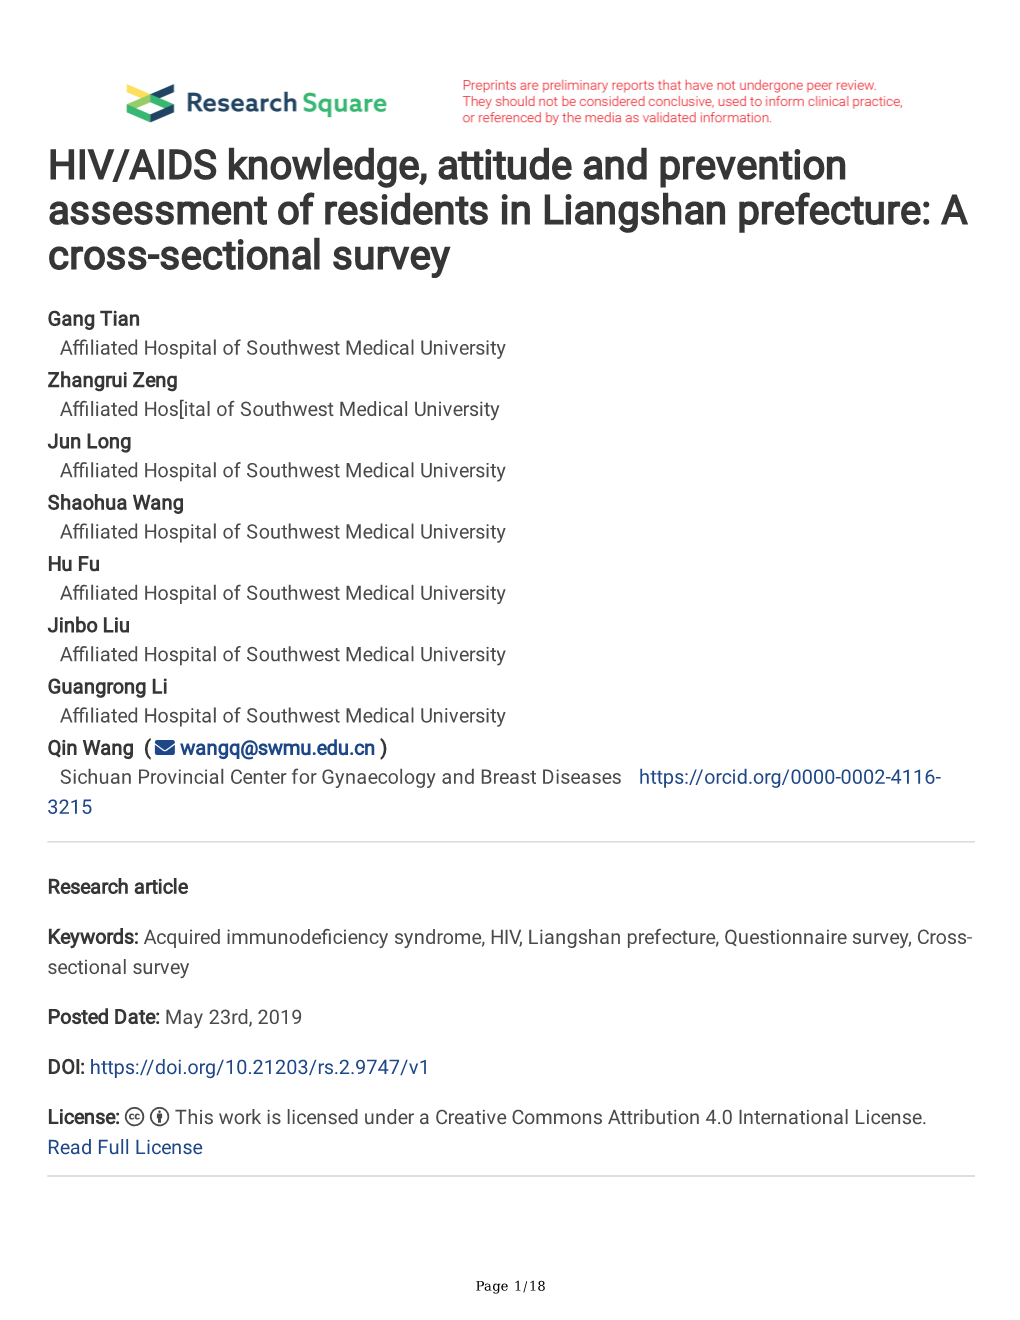 HIV/AIDS Knowledge, Attitude and Prevention Assessment of Residents in Liangshan Prefecture: a Cross-Sectional Survey